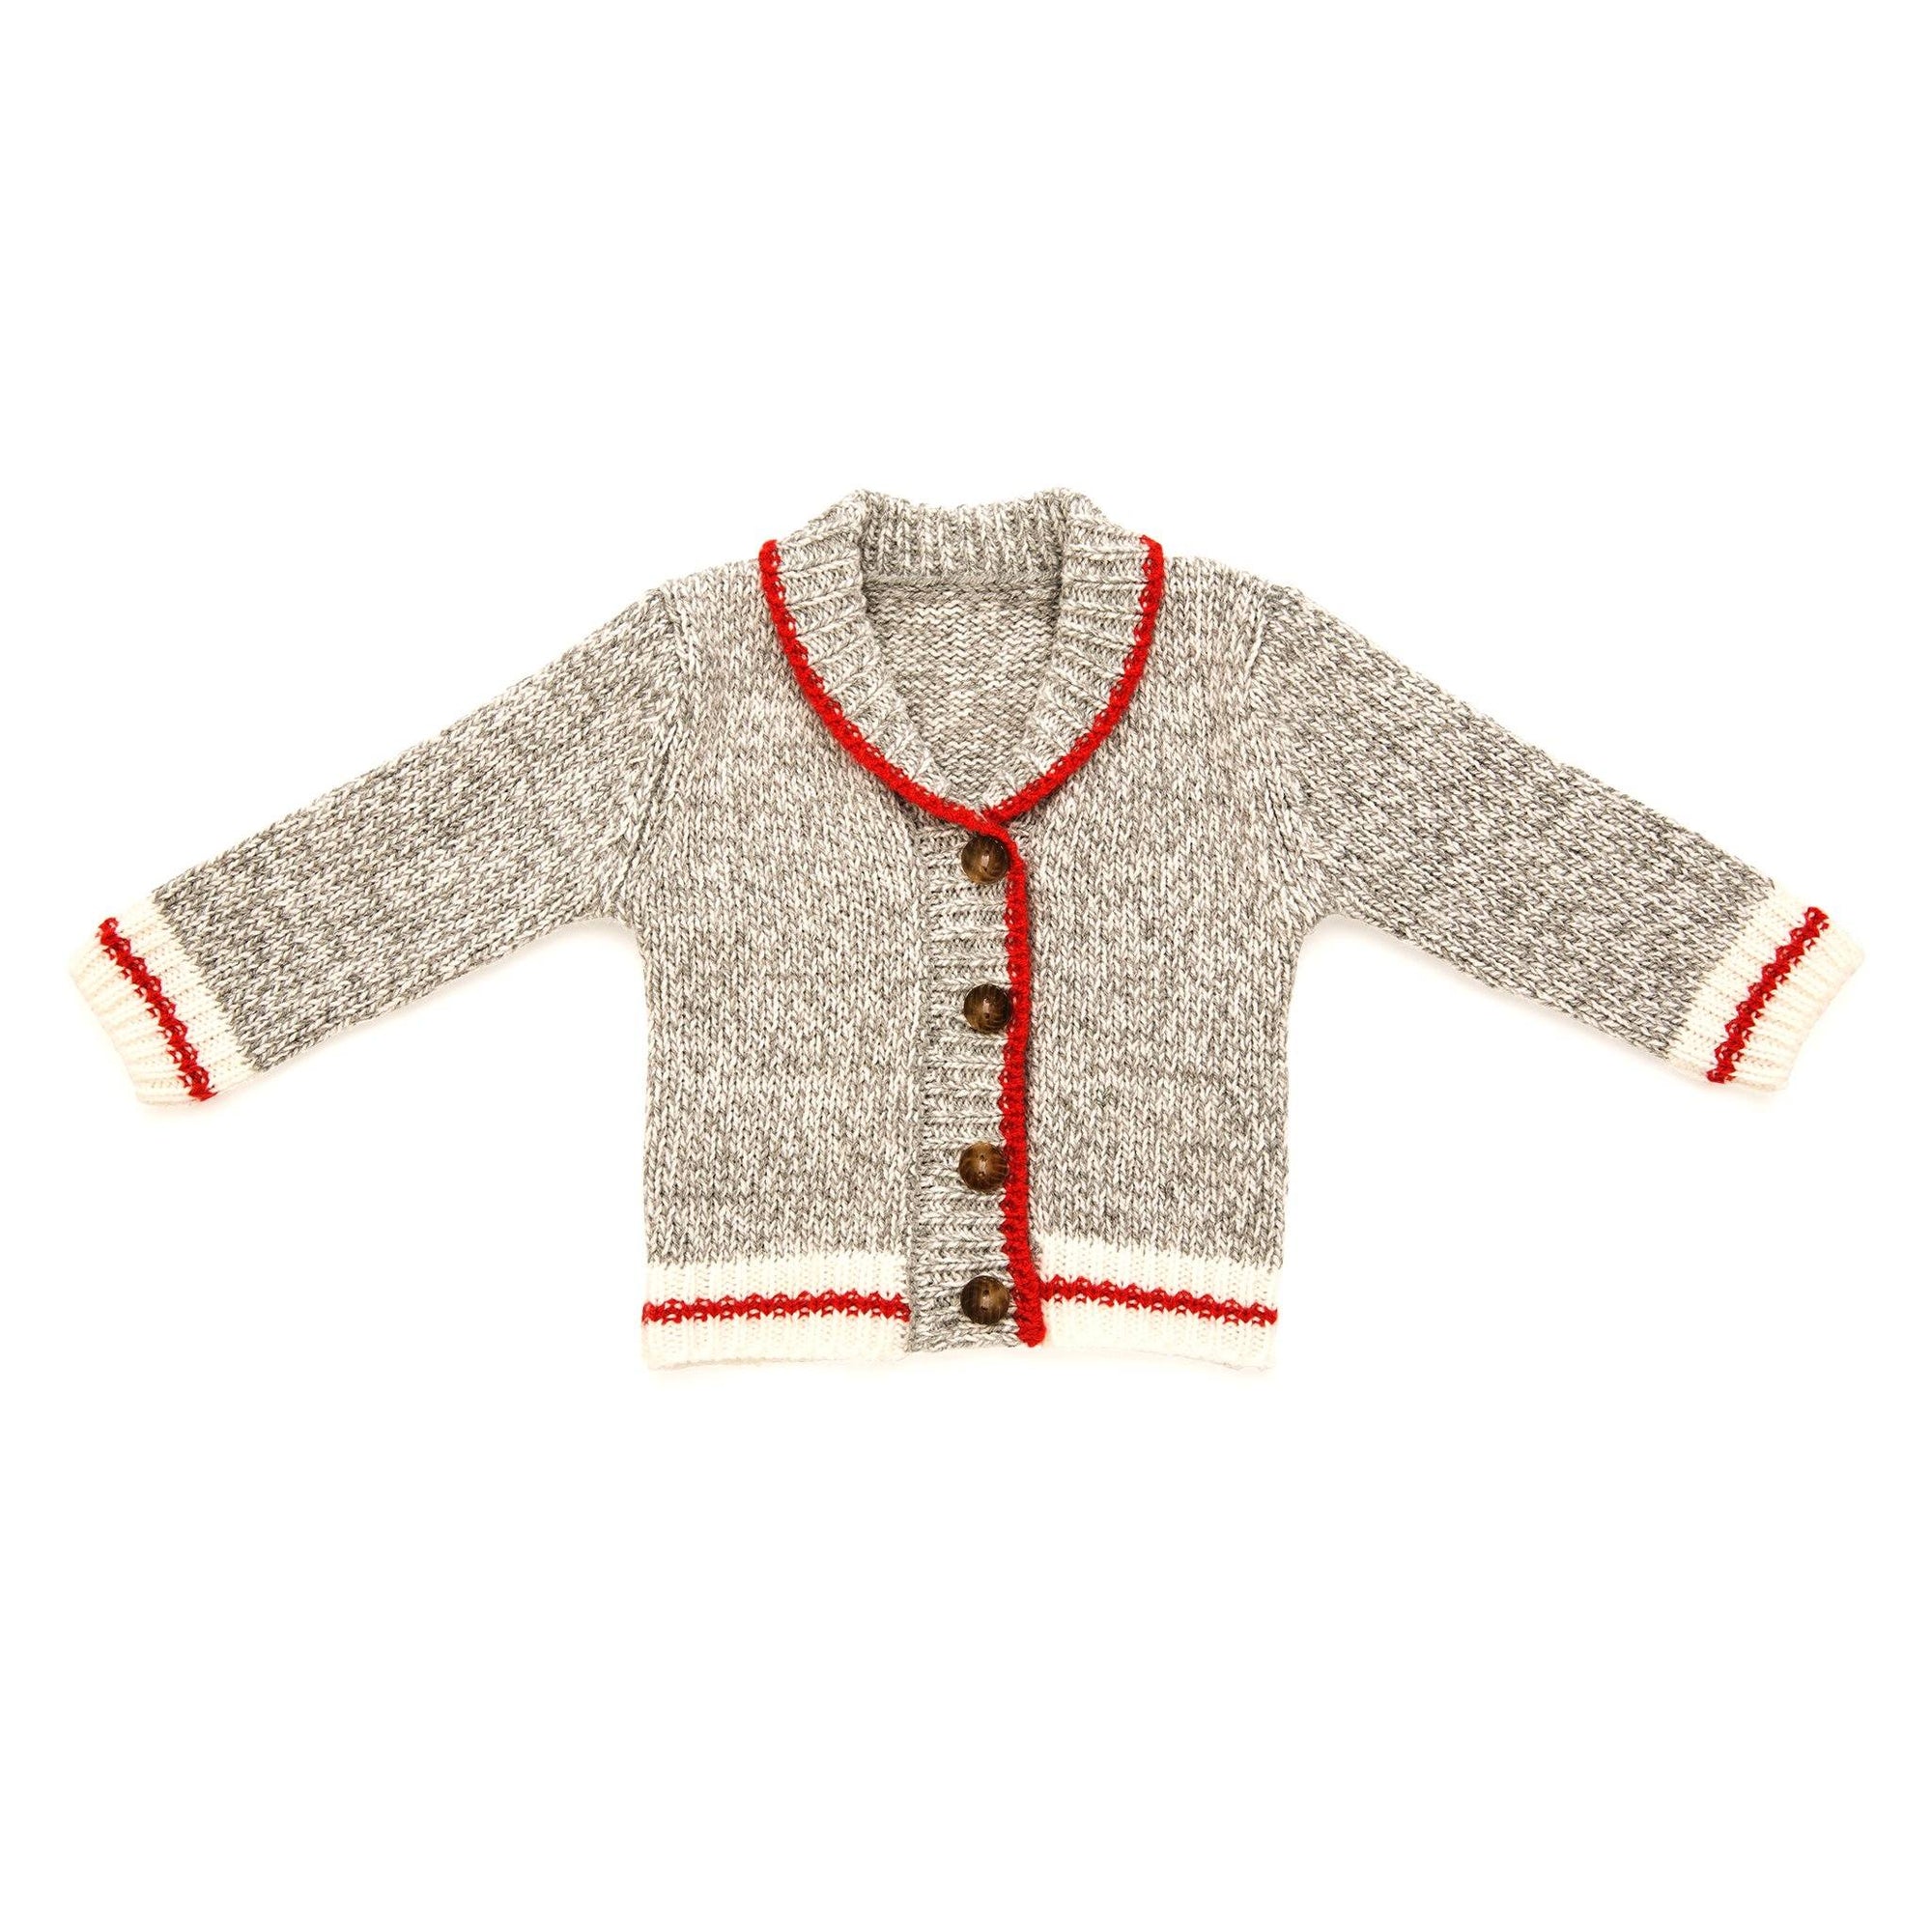 Beautiful Canadian style cardigan sweater in grey and red for 18 inch dolls